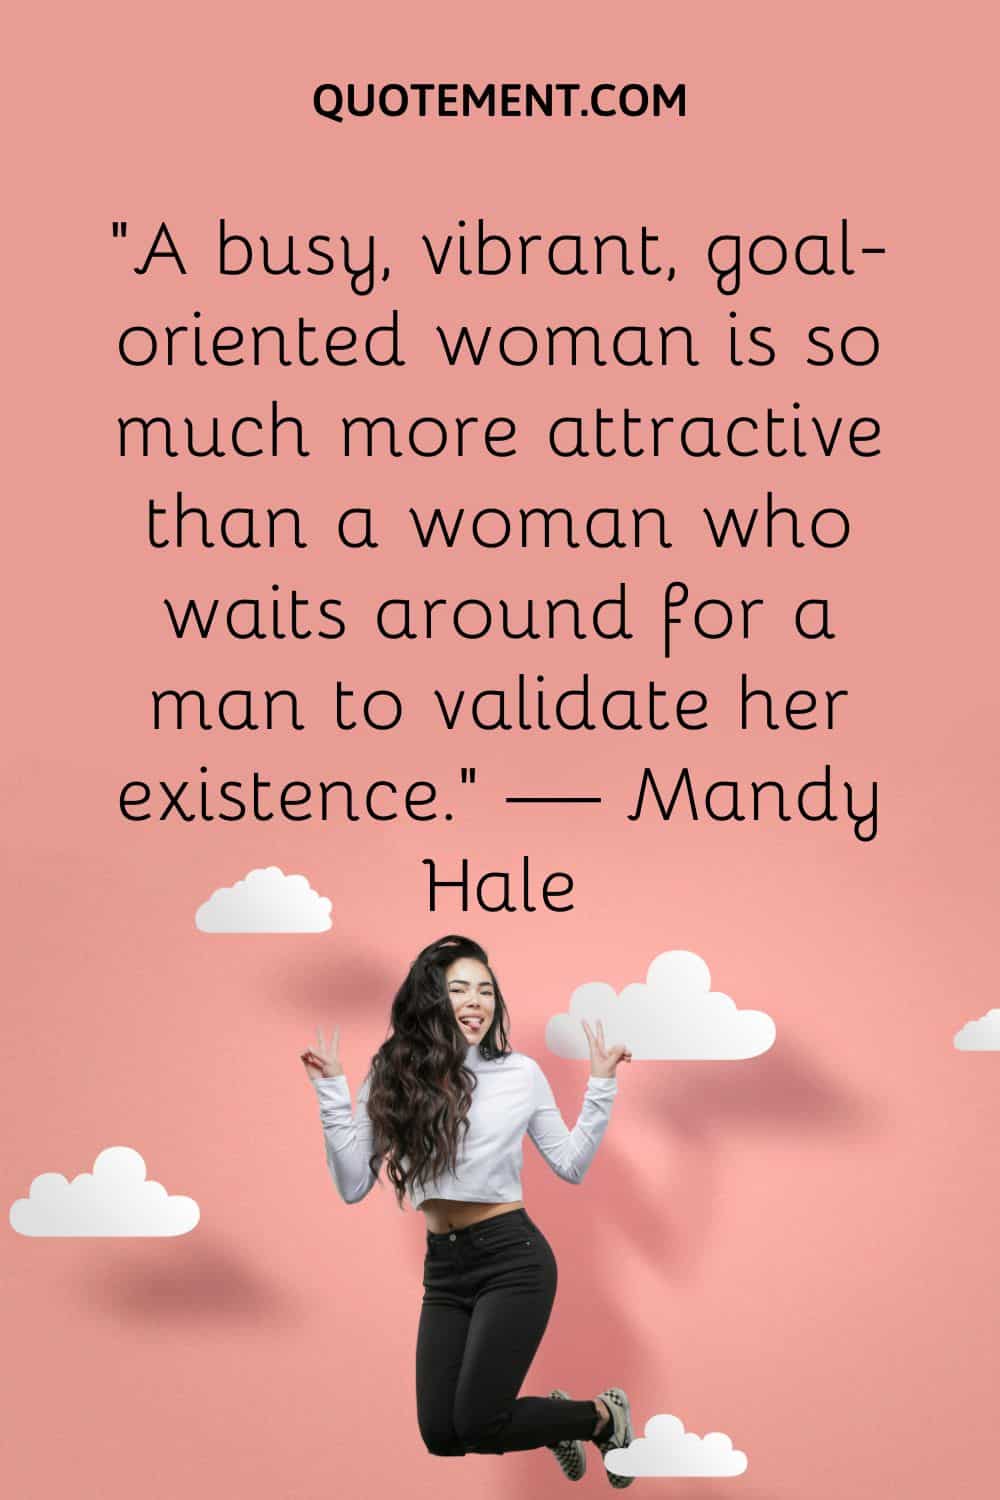 A busy, vibrant, goal-oriented woman is so much more attractive than a woman who waits around for a man to validate her existence